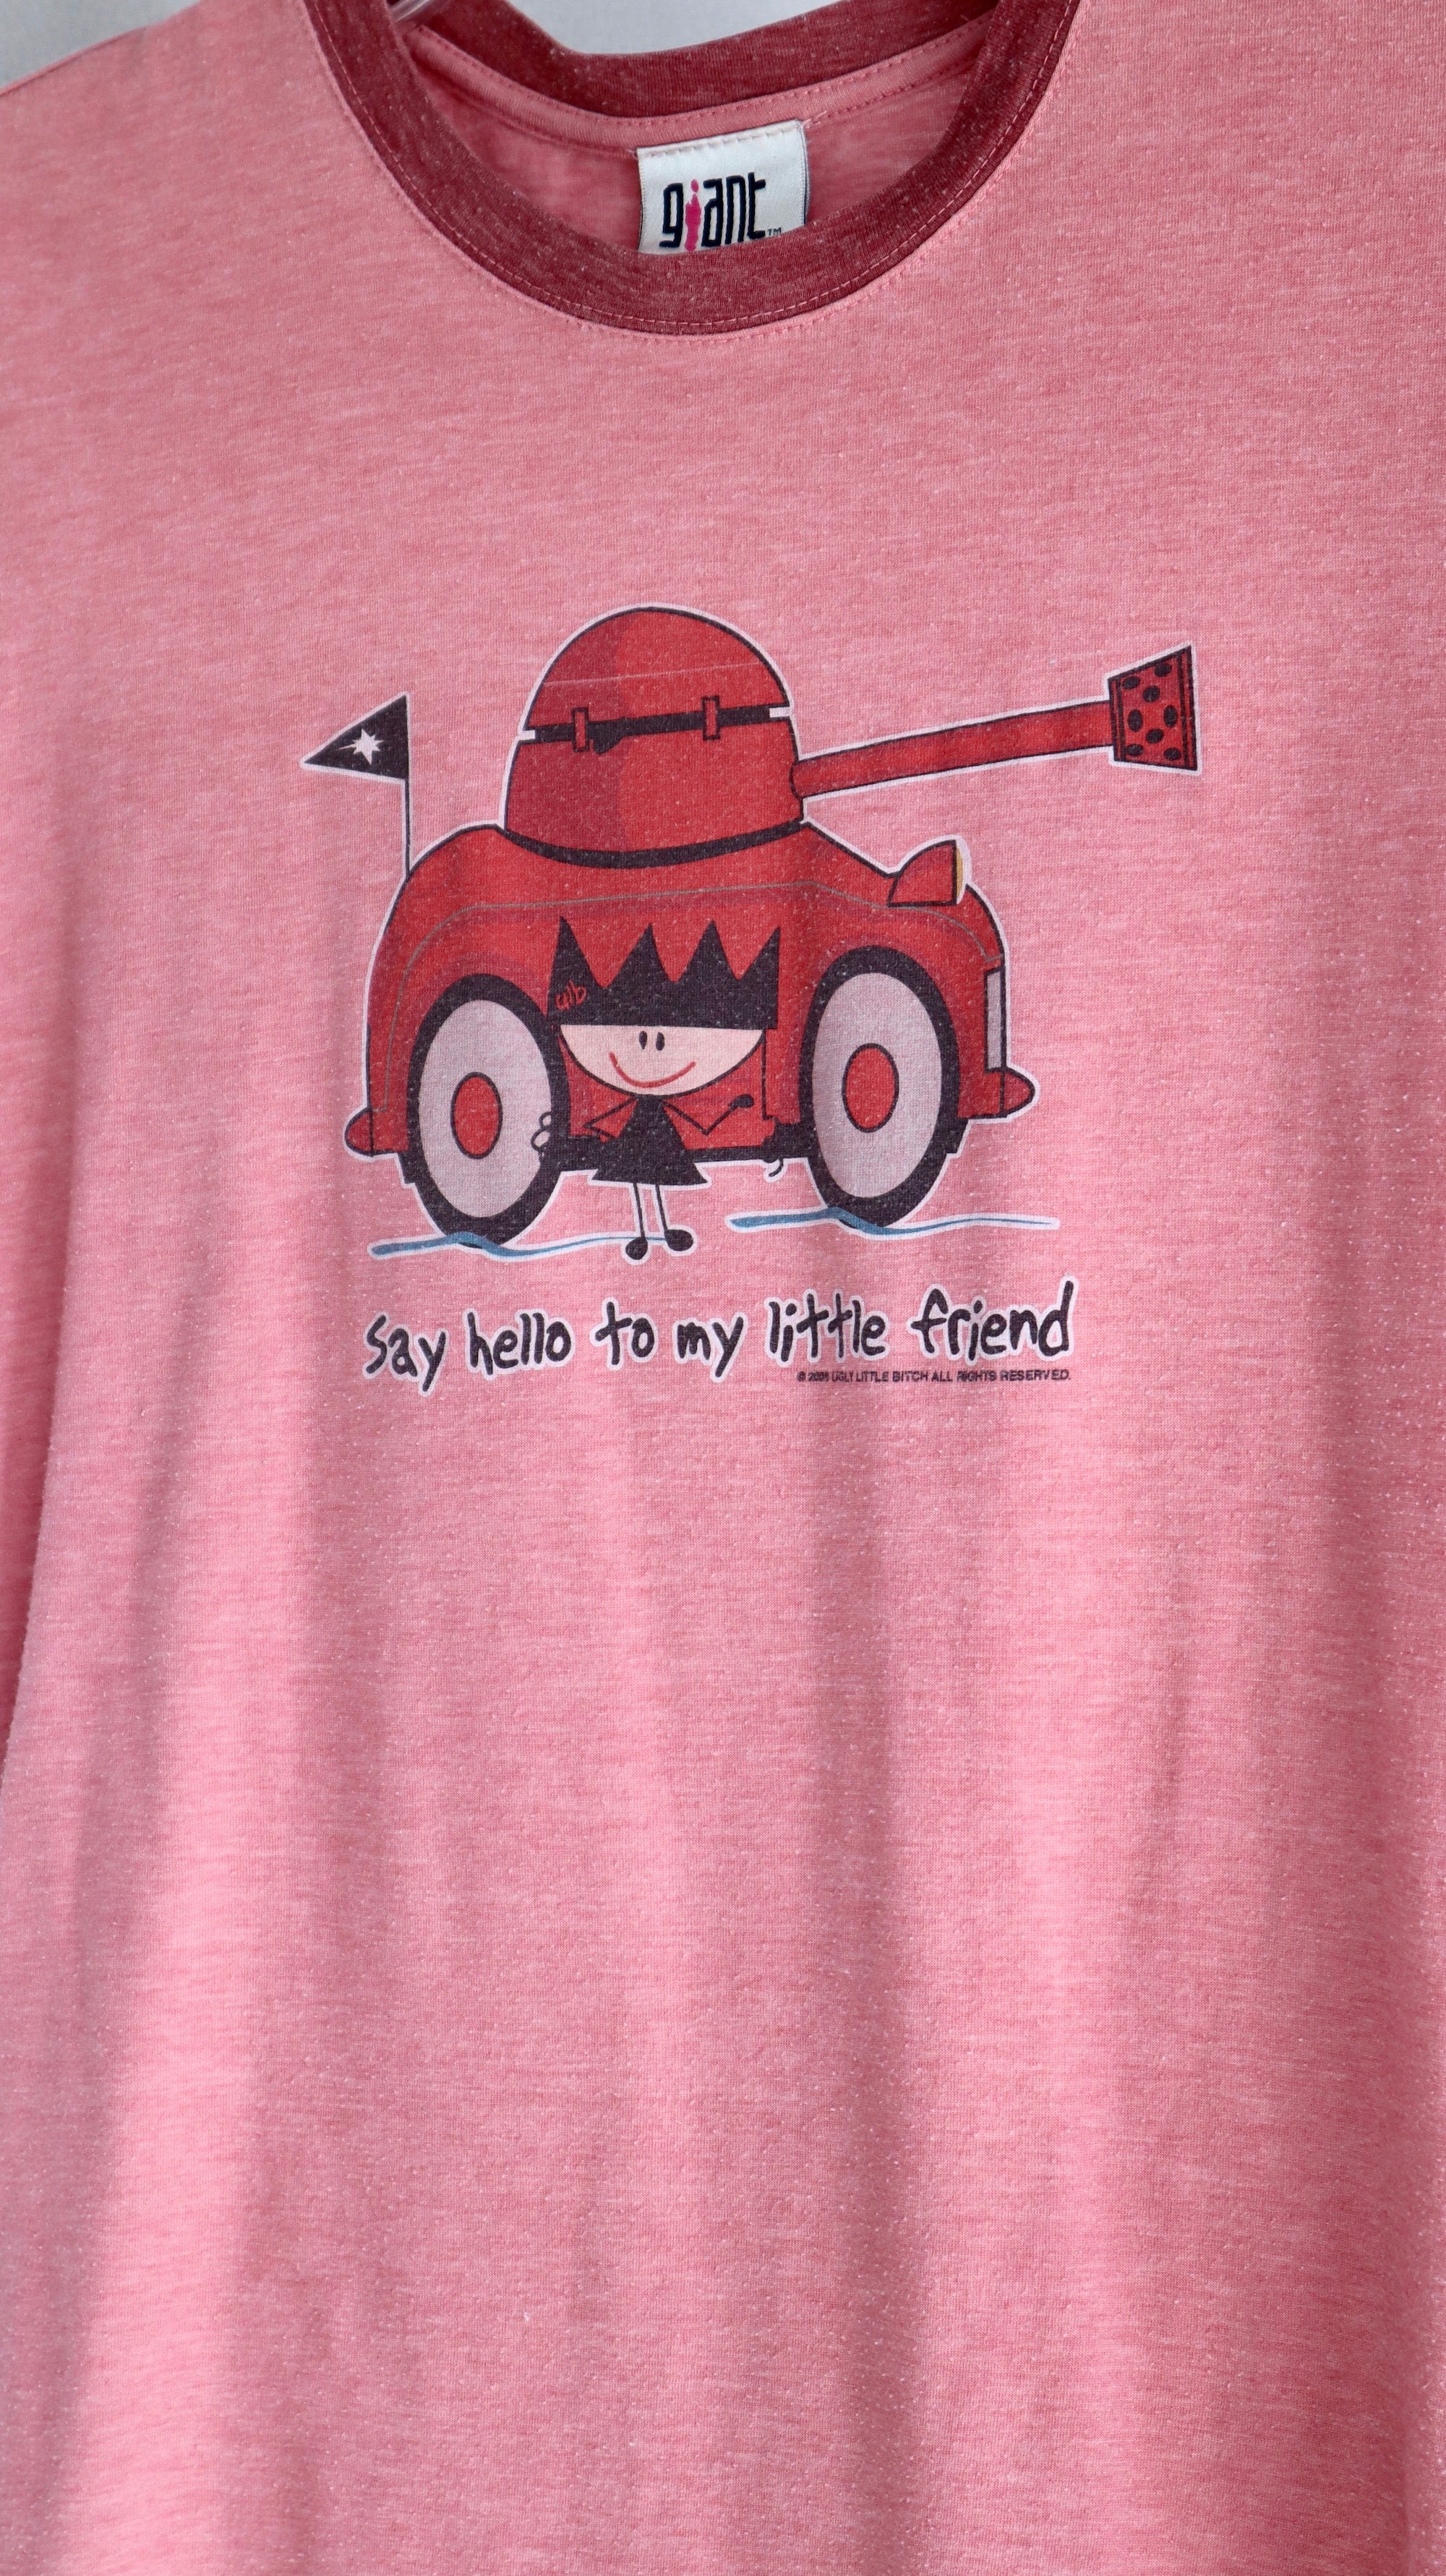 VINTAGE 2005 "SAY HELLO TO MY LITTLE FRIEND" RINGER BABY TEE